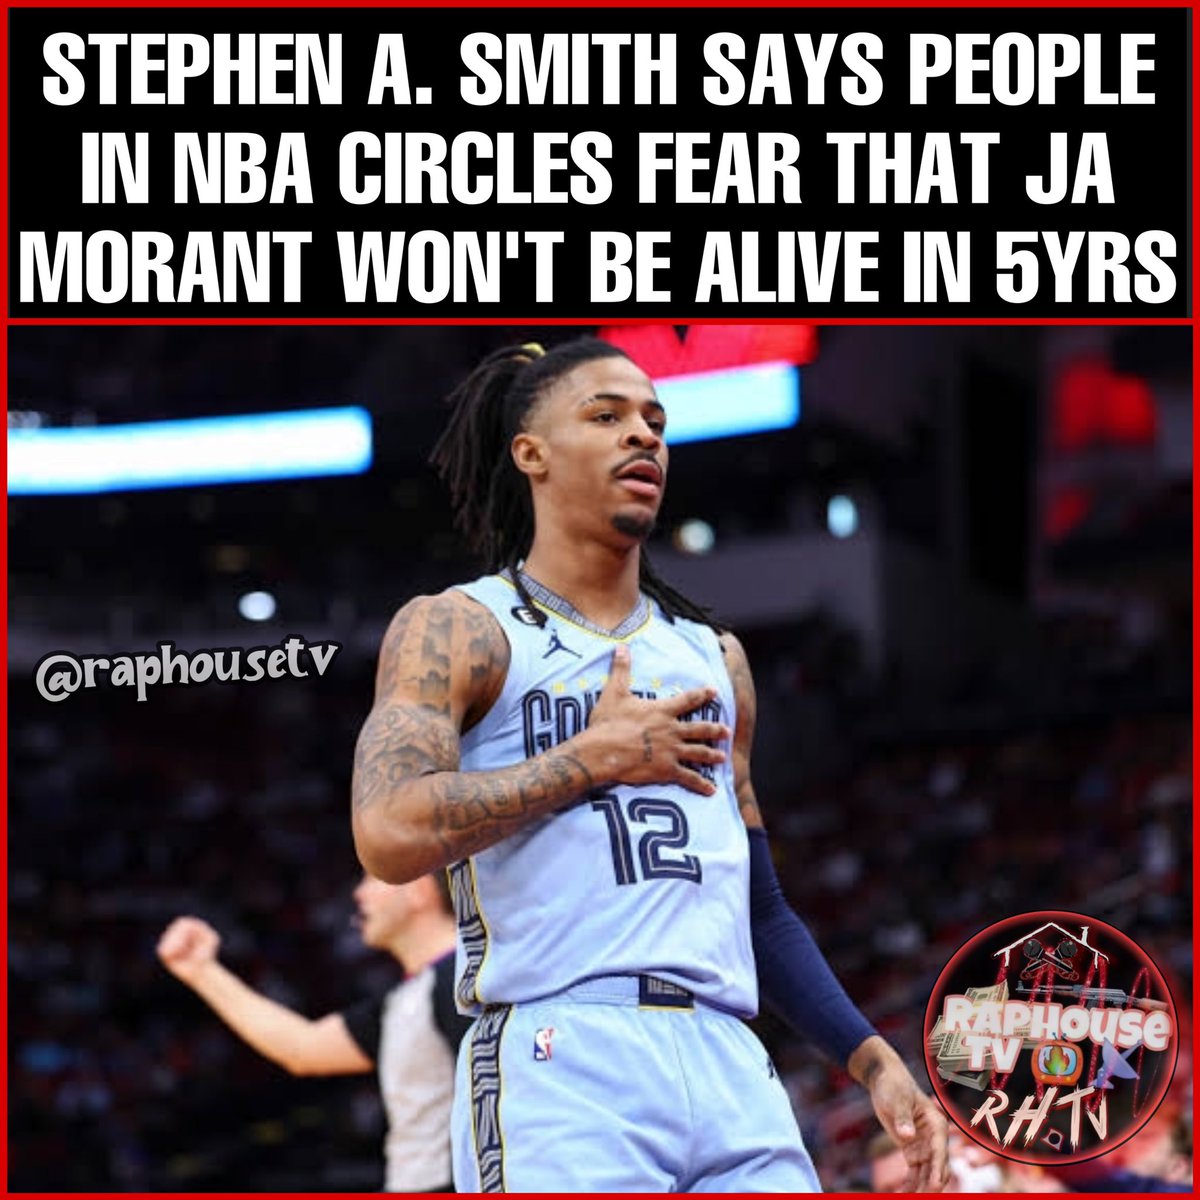 Stephen A. Smith Says People In NBA Circles Fear That Ja Morant Won't Be Alive In 5 Years.